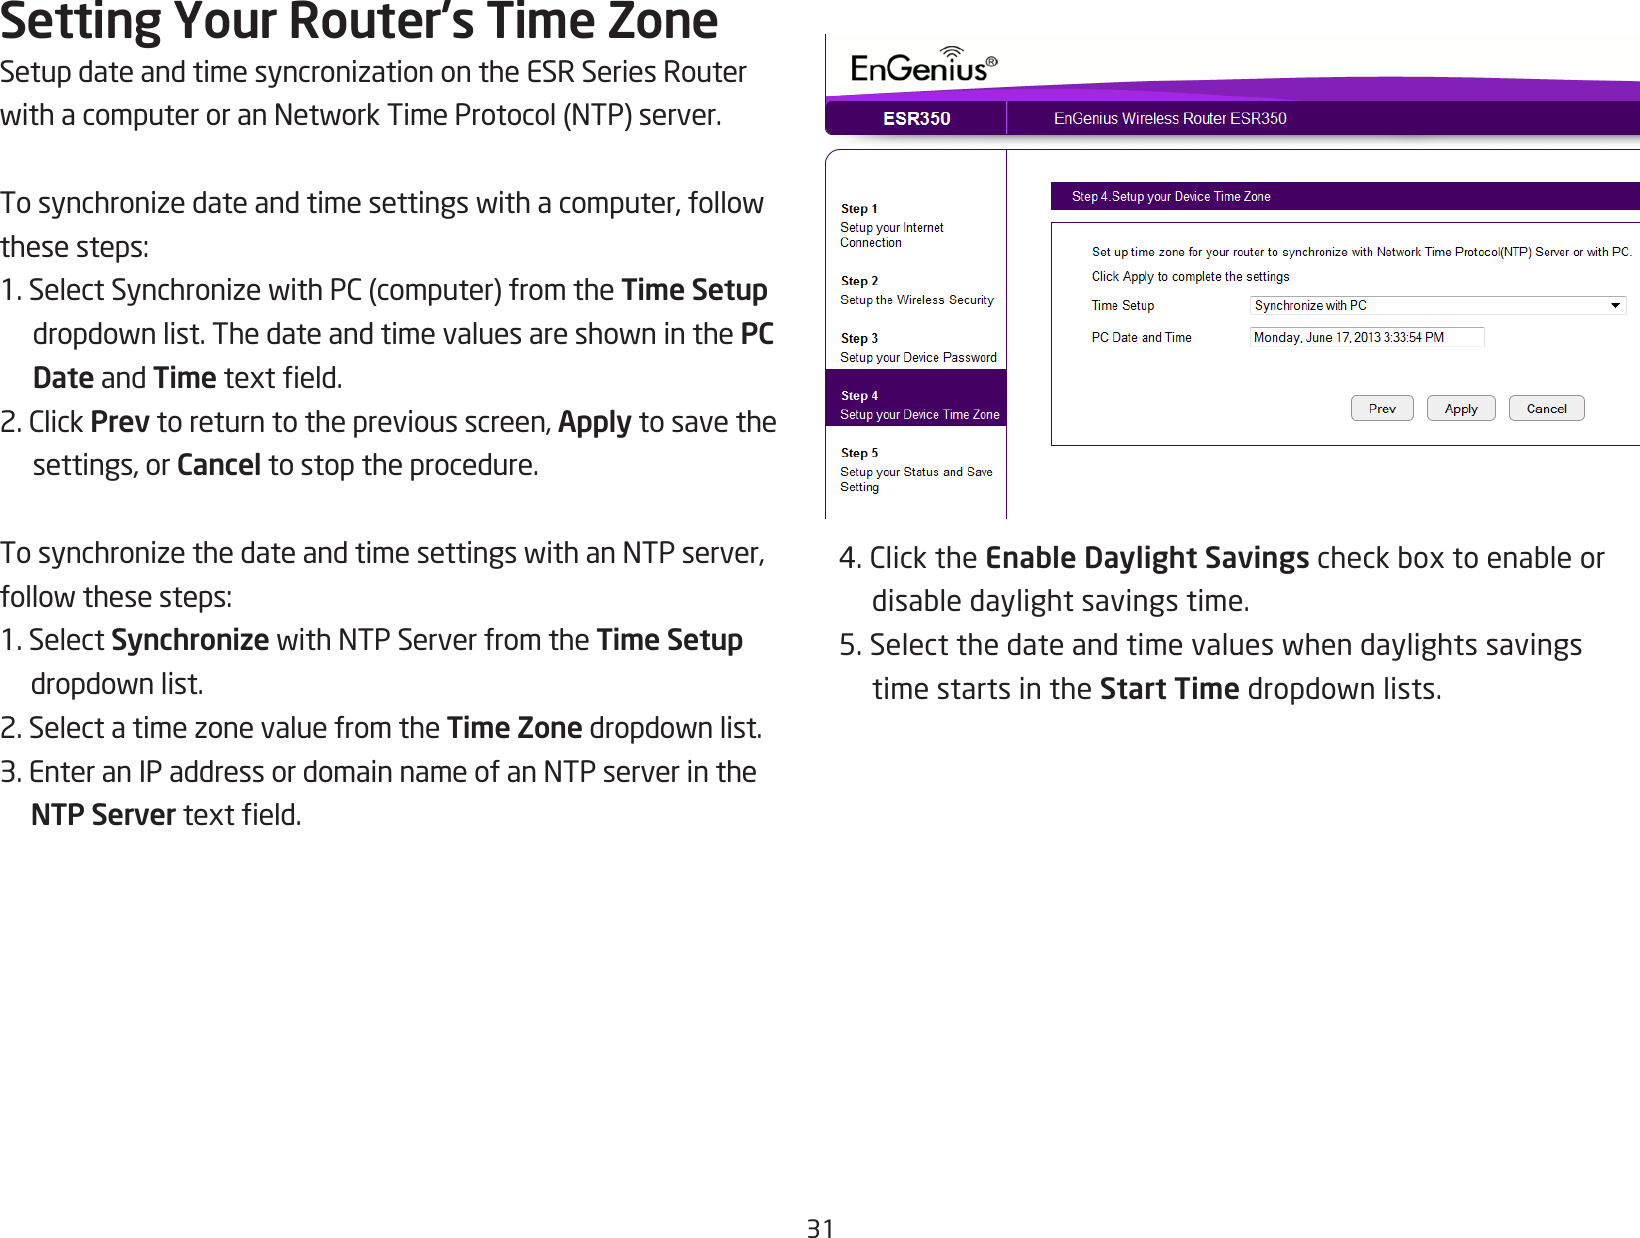 31Setting Your Router’s Time ZoneSetupdateandtimesyncronizationontheESRSeriesRouterwithacomputeroranNetworkTimeProtocol(NTP)server.Tosynchronizedateandtimesettingswithacomputer,followthese steps:1.SelectSynchronizewithPC(computer)fromtheTime Setup dropdownlist.ThedateandtimevaluesareshowninthePC Date and Timetexteld.2.ClickPrev to return to the previous screen, Apply to save the settings, or Cancel to stop the procedure.TosynchronizethedateandtimesettingswithanNTPserver,followthesesteps:1. Select SynchronizewithNTPServerfromtheTime Setup dropdownlist.2.SelectatimezonevaluefromtheTime Zonedropdownlist.3.EnteranIPaddressordomainnameofanNTPserverintheNTP Servertexteld.4.ClicktheEnable Daylight Savingscheckboxtoenableordisabledaylightsavingstime.5.Selectthedateandtimevalueswhendaylightssavingstime starts in the Start Timedropdownlists.